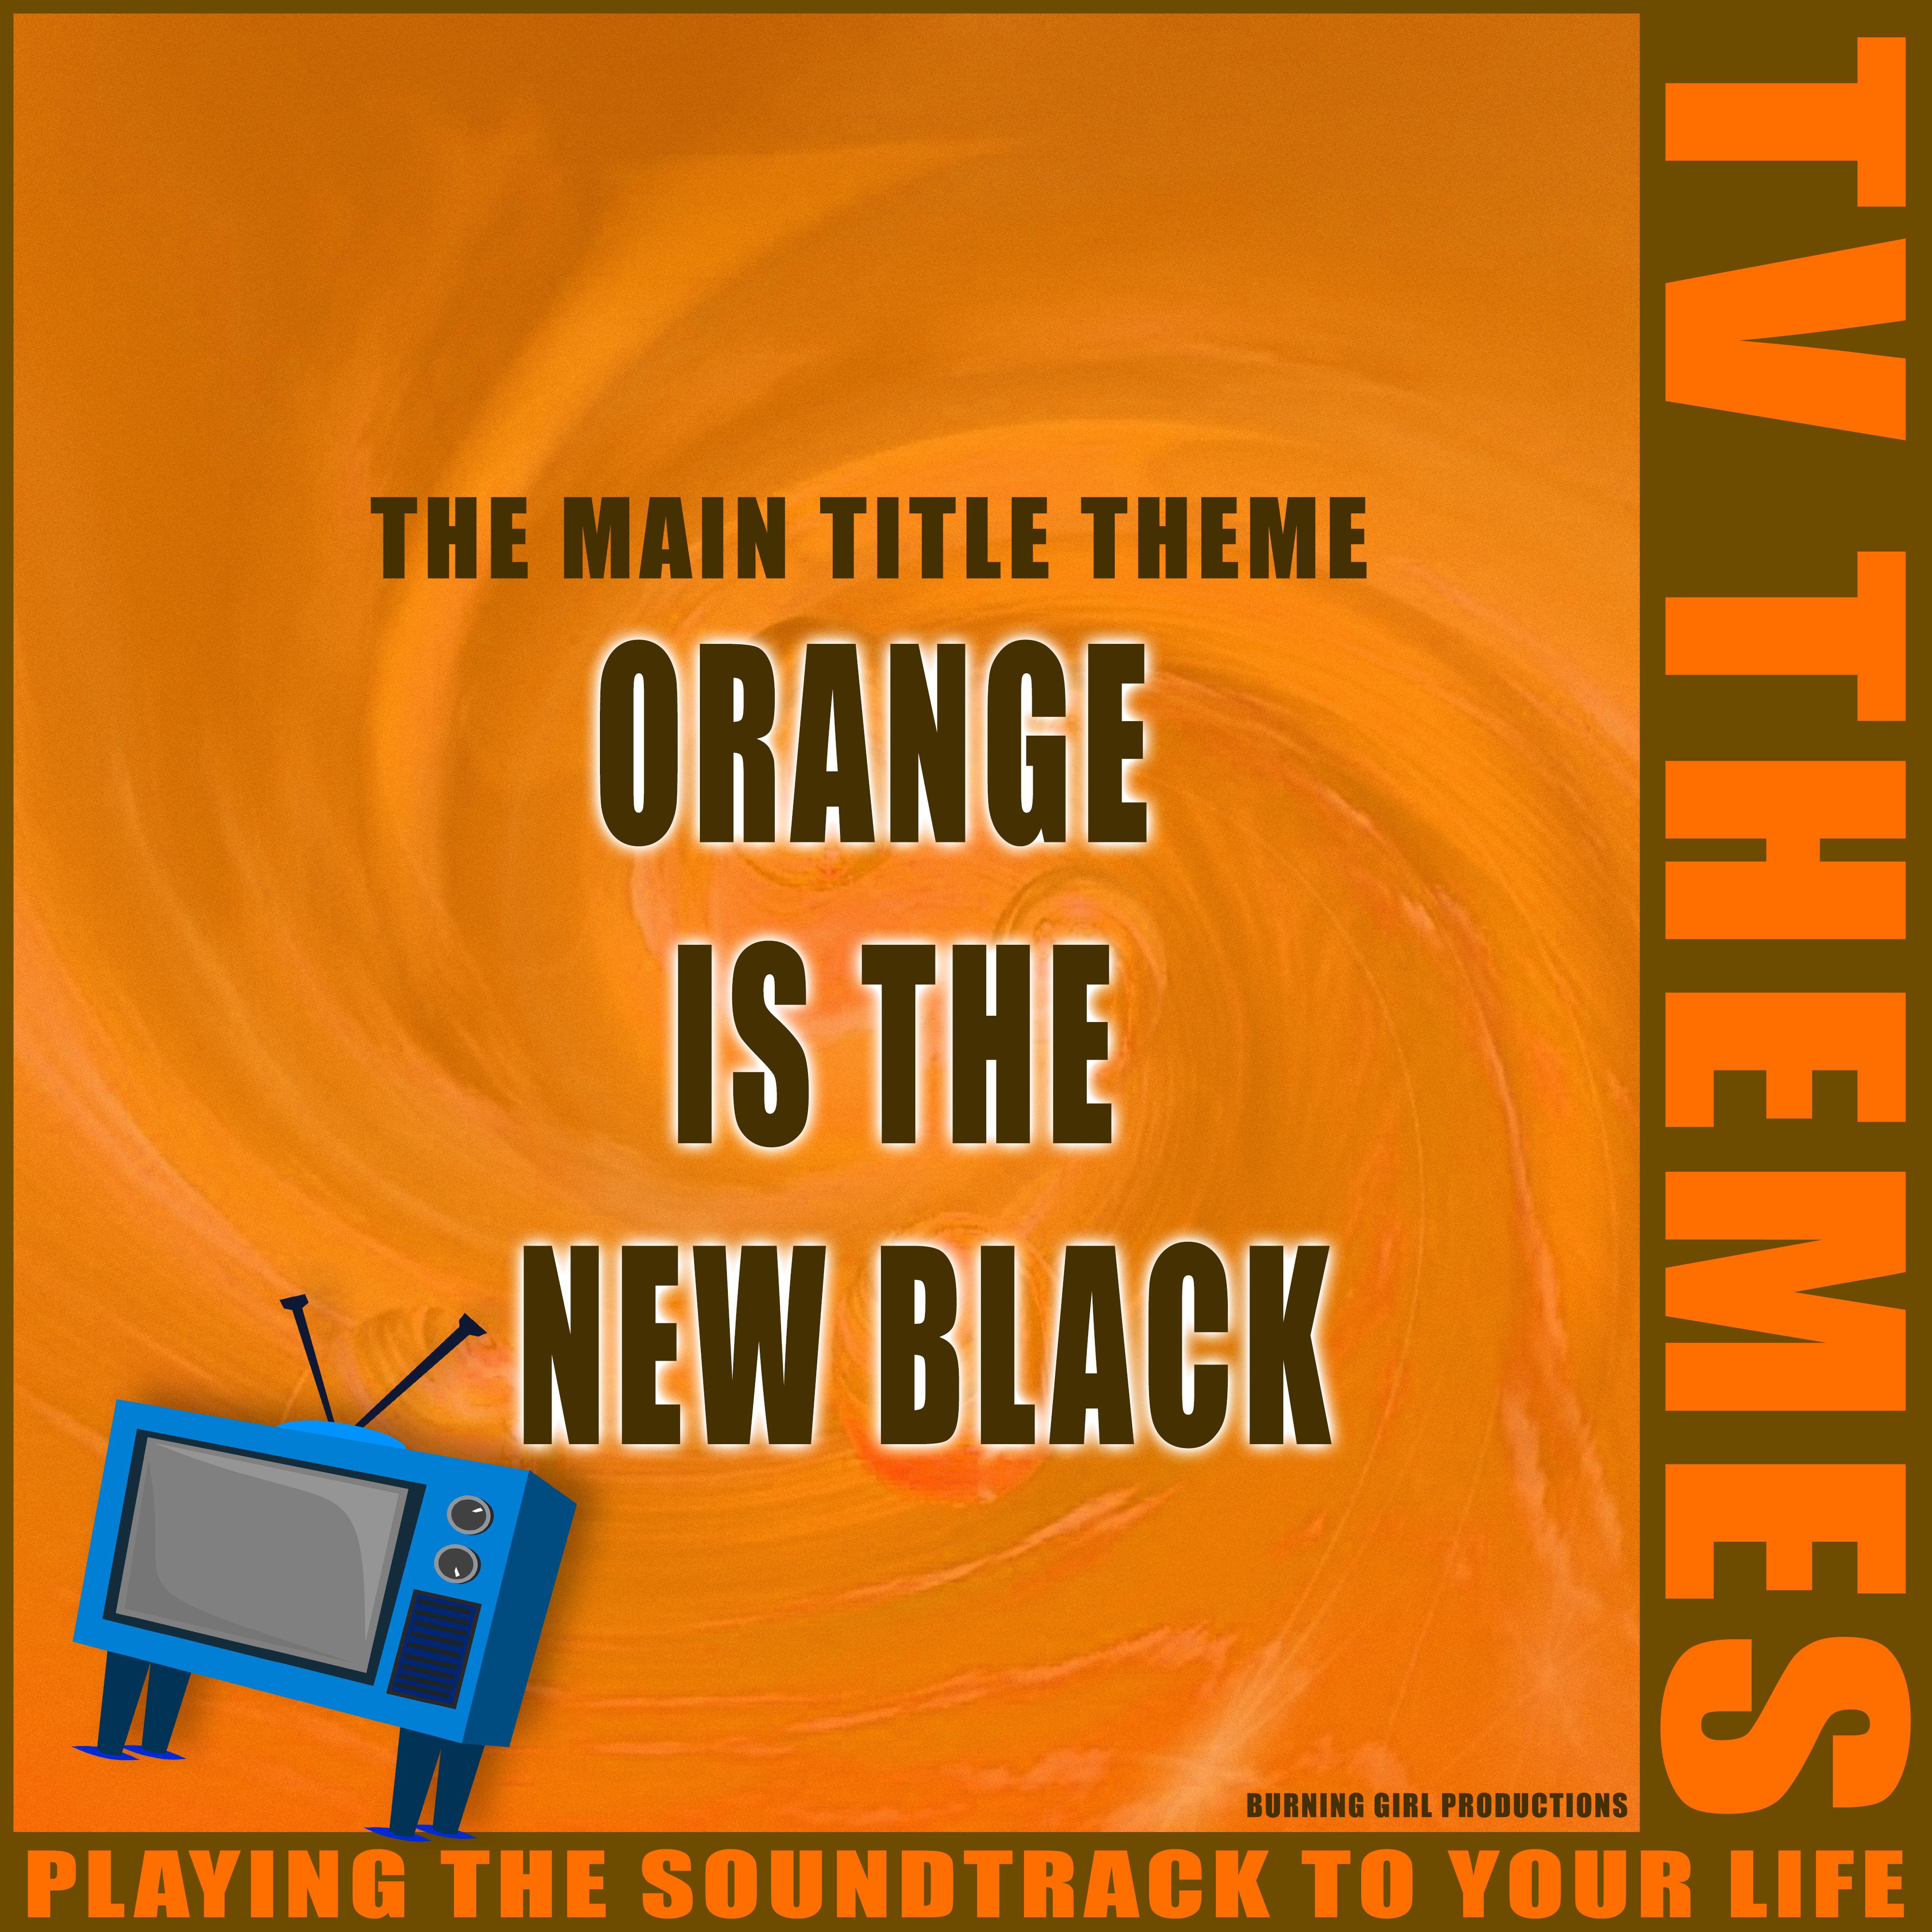 The Main Title Theme - Orange is the New Black